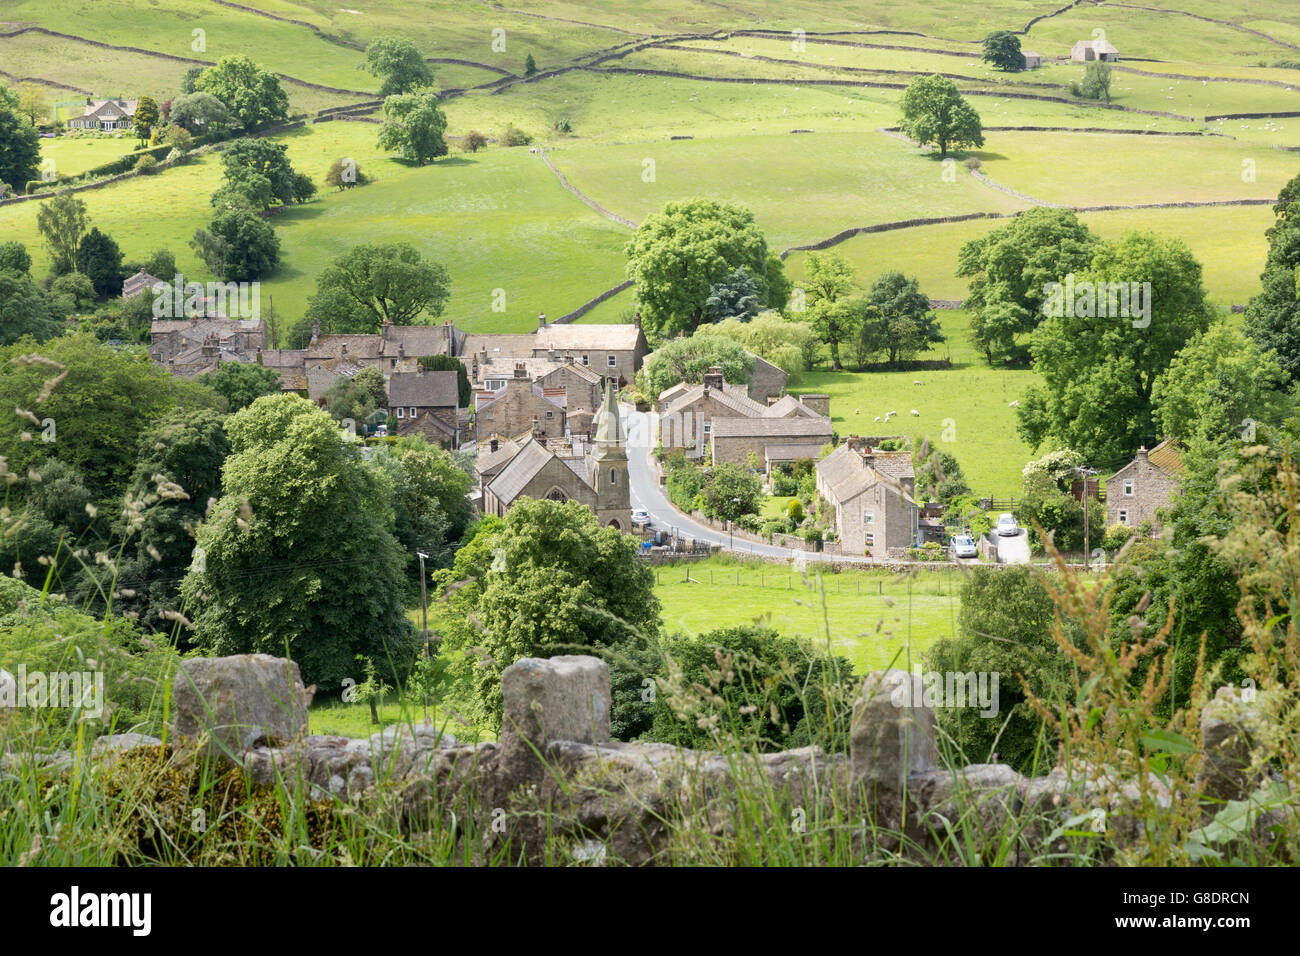 Burnsall Dorf und des Flusses Wharfe in Wharfedale, The Yorkshire Dales England, Juni 2016 Stockfoto